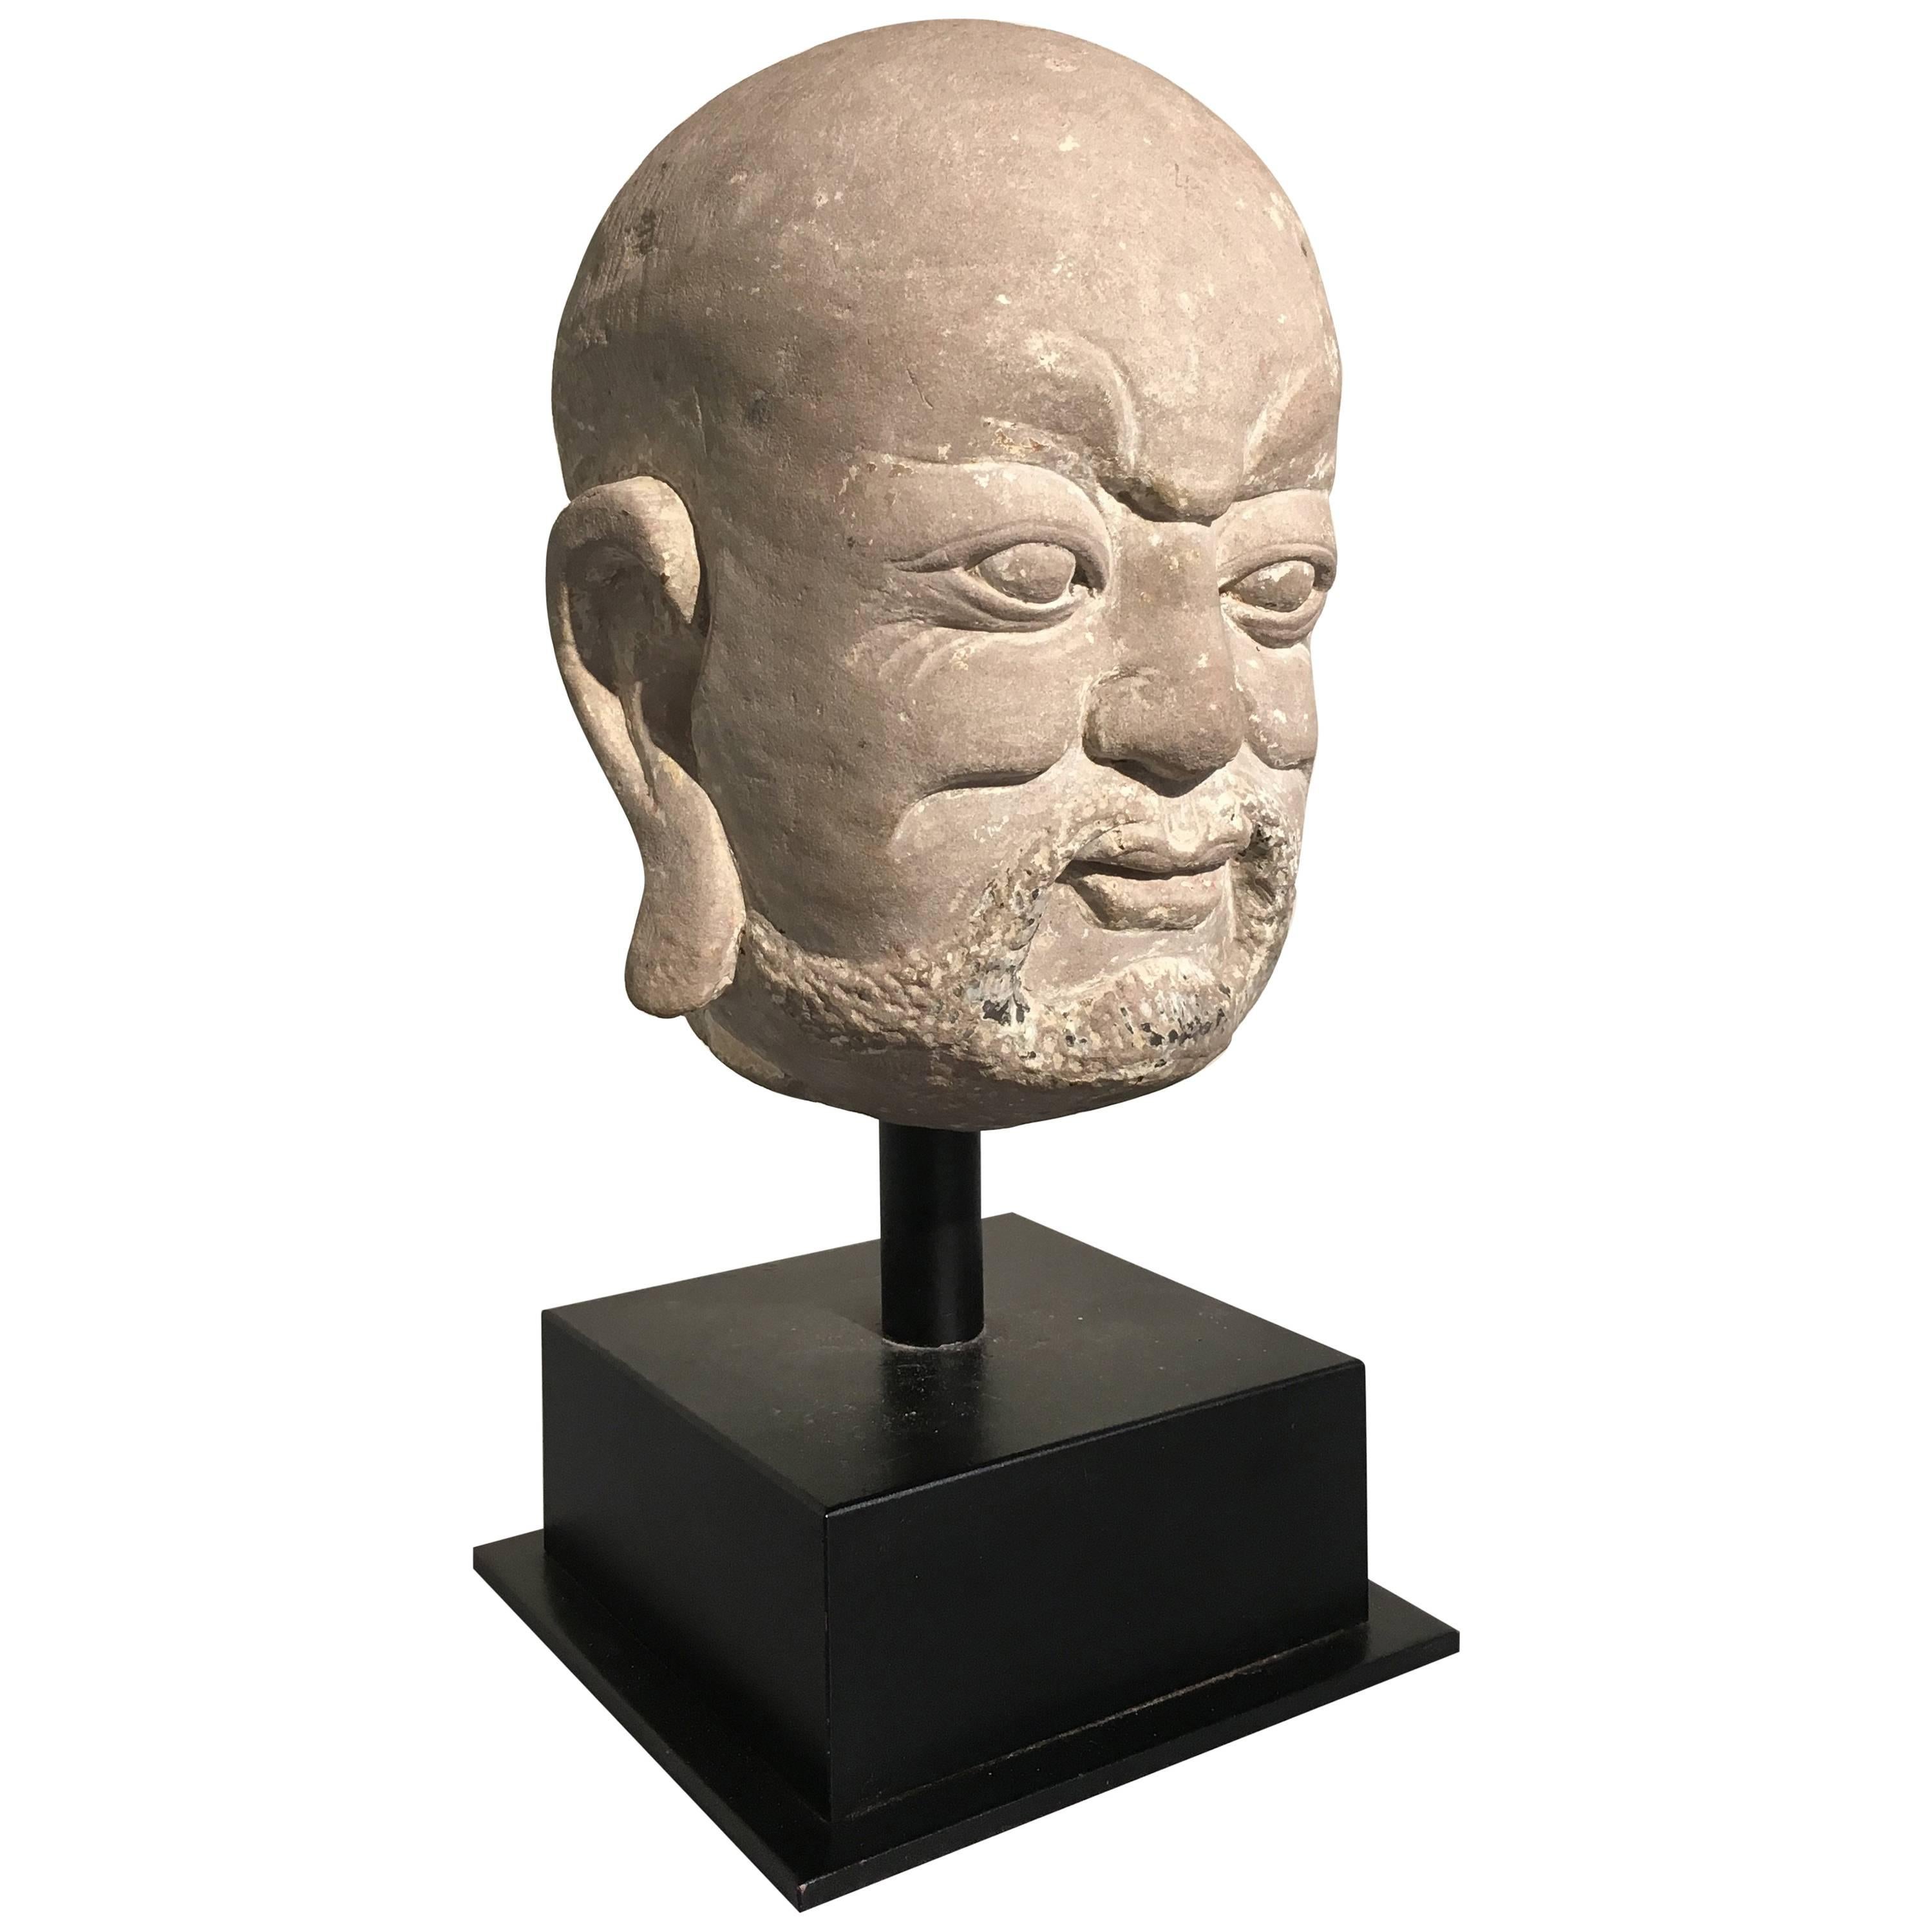 Chinese Carved Limestone Luohan Head, Yuan Dynasty, 1271 - 1368